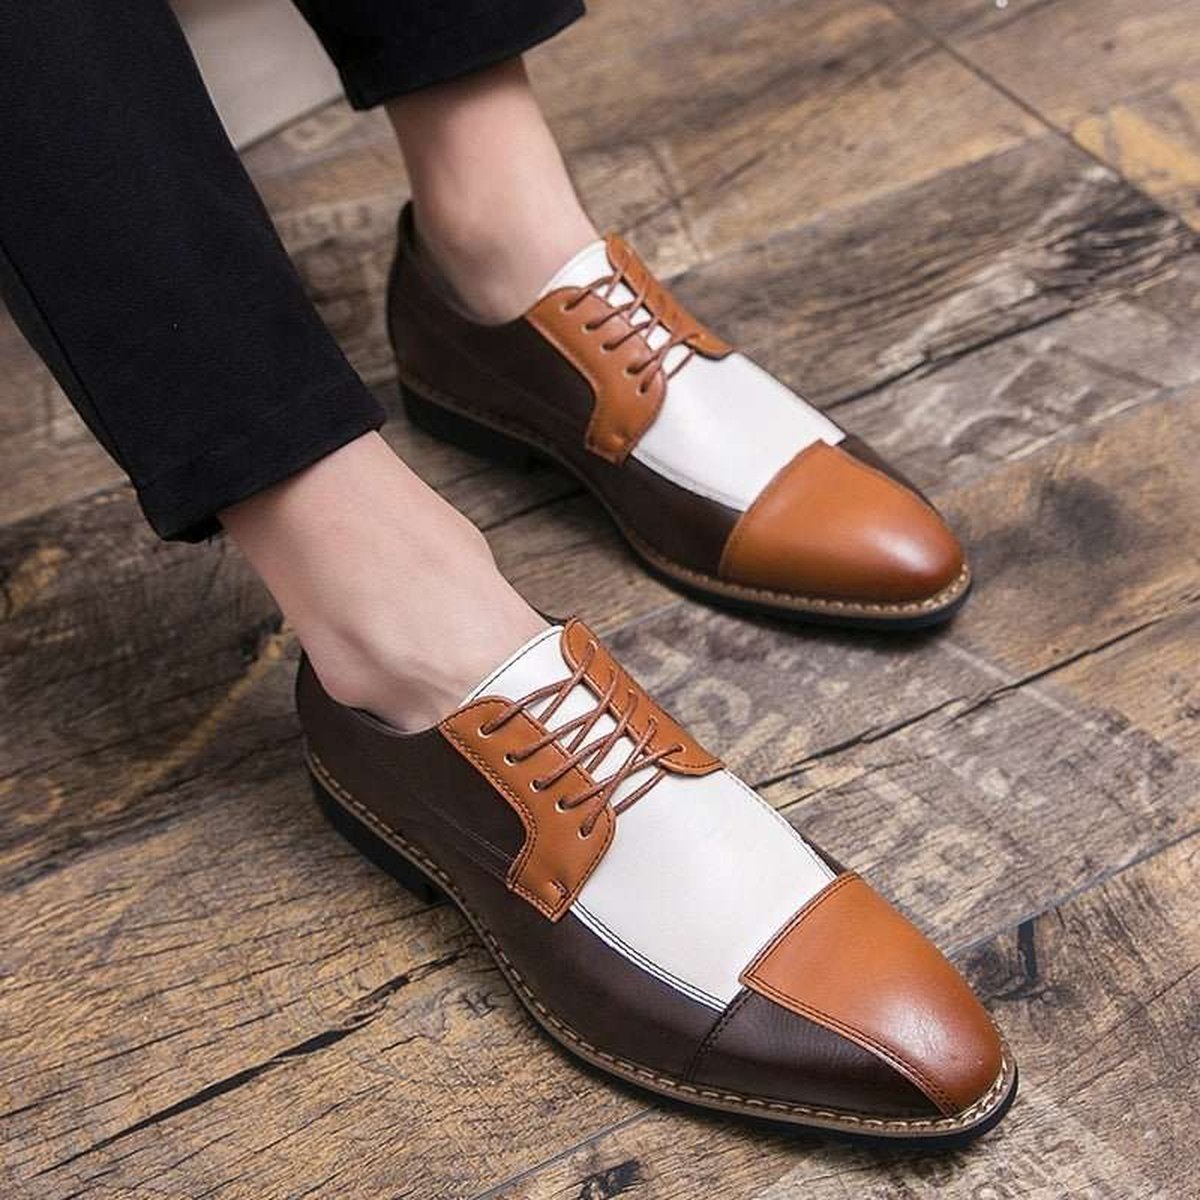 Handcrafted Elegance Lace-Up Dress Shoes with Mixed Colors